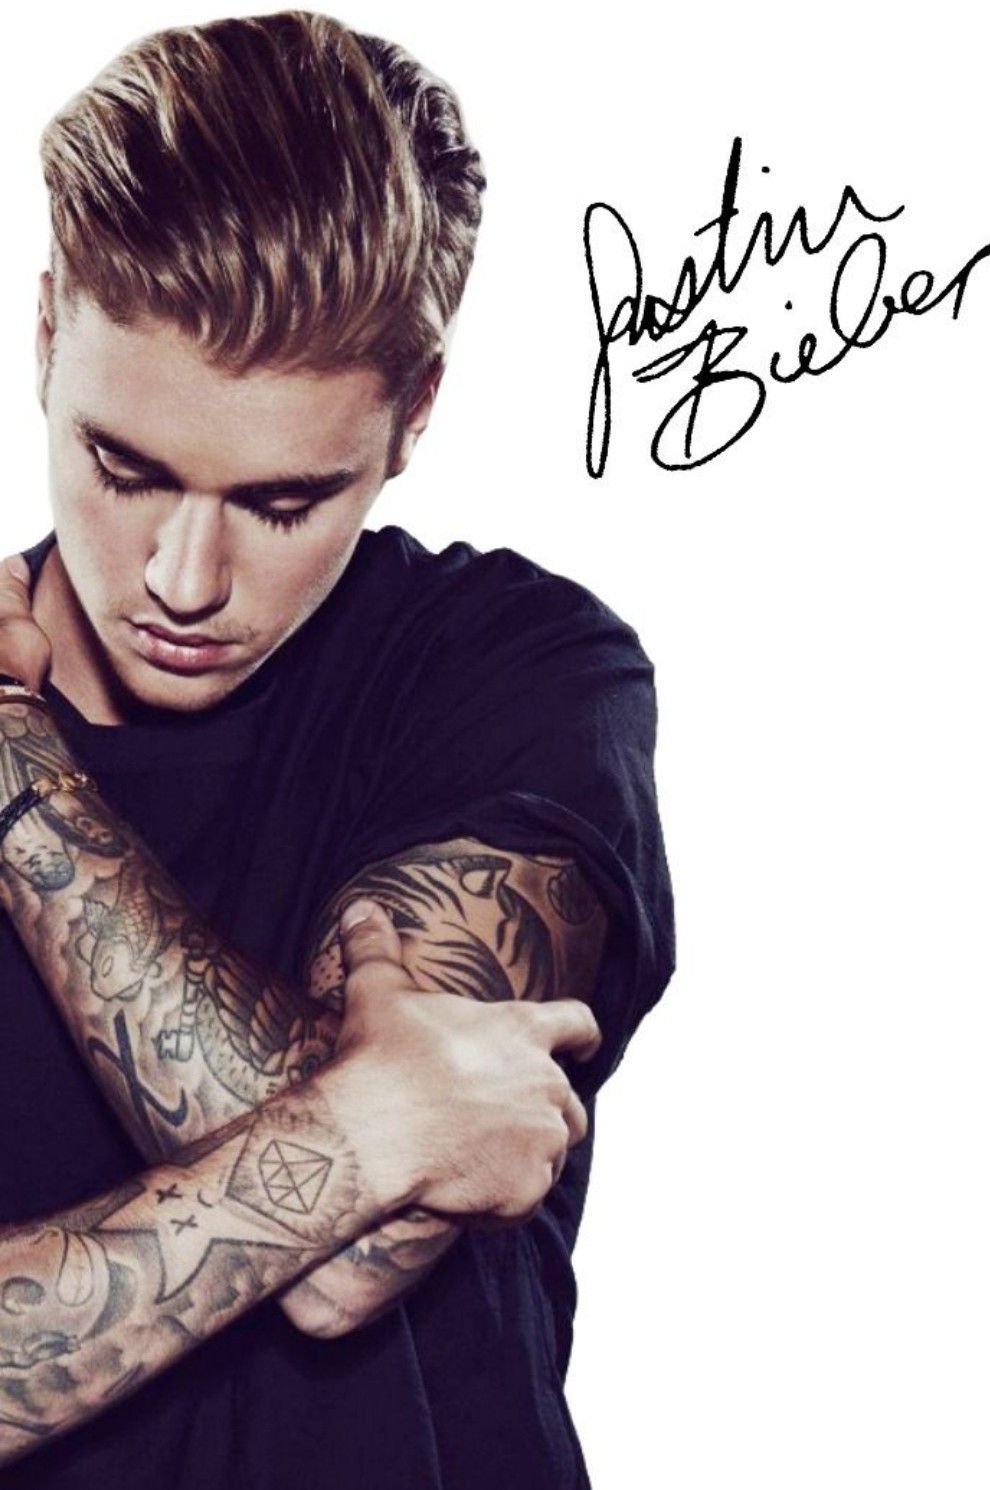 Justin Bieber tattoo images released by Miami police  BBC News